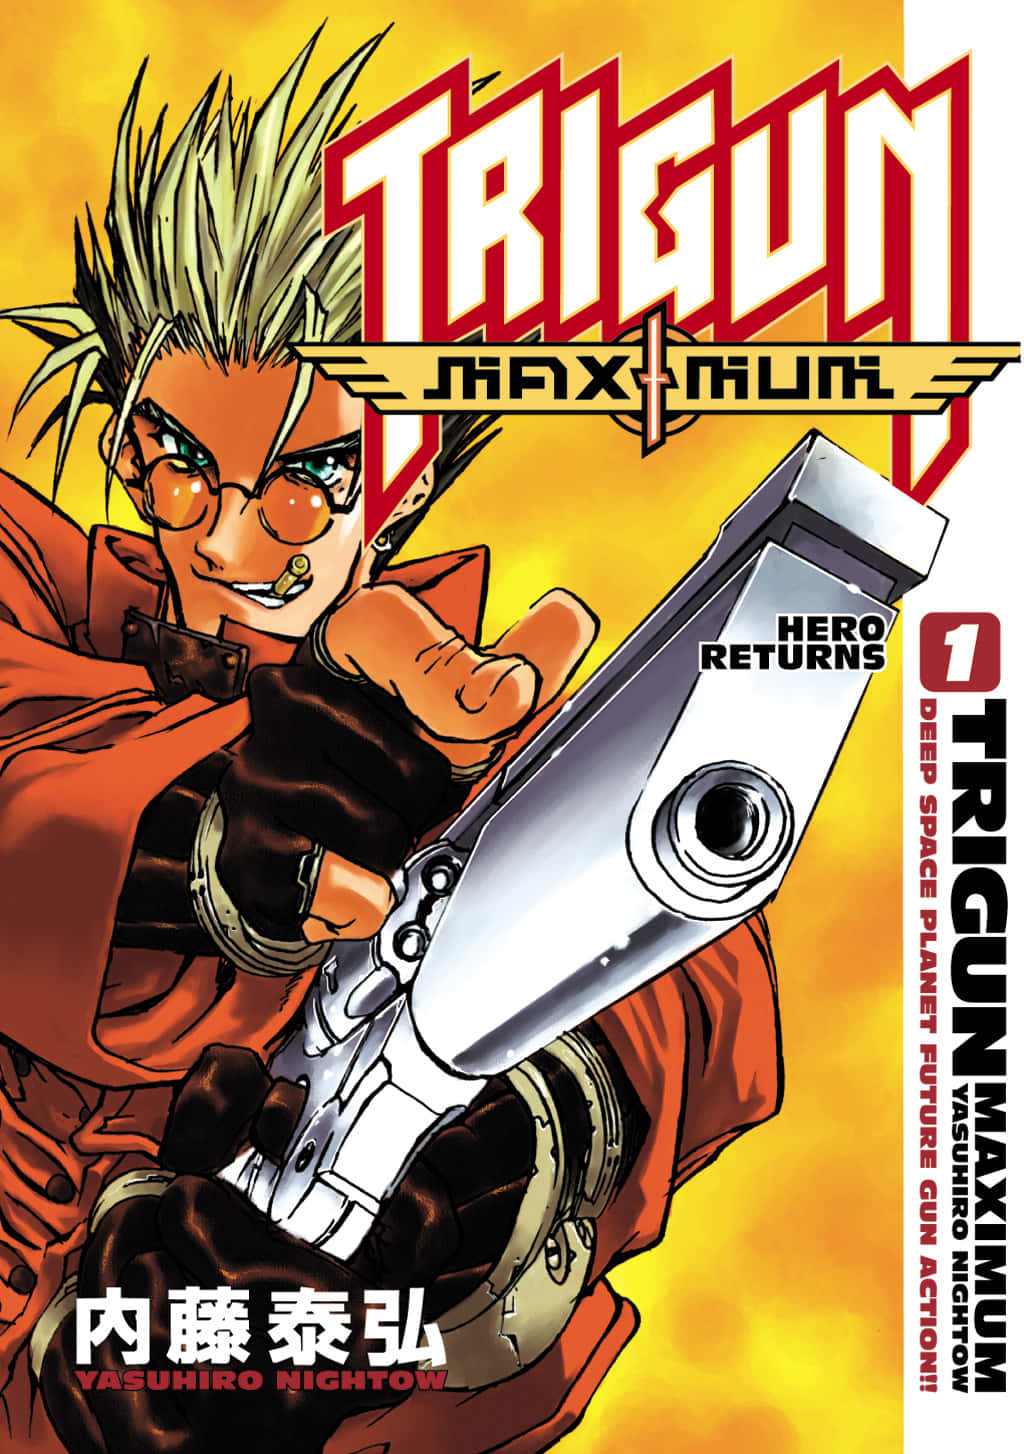 Vash the Stampede ready for action in Trigun